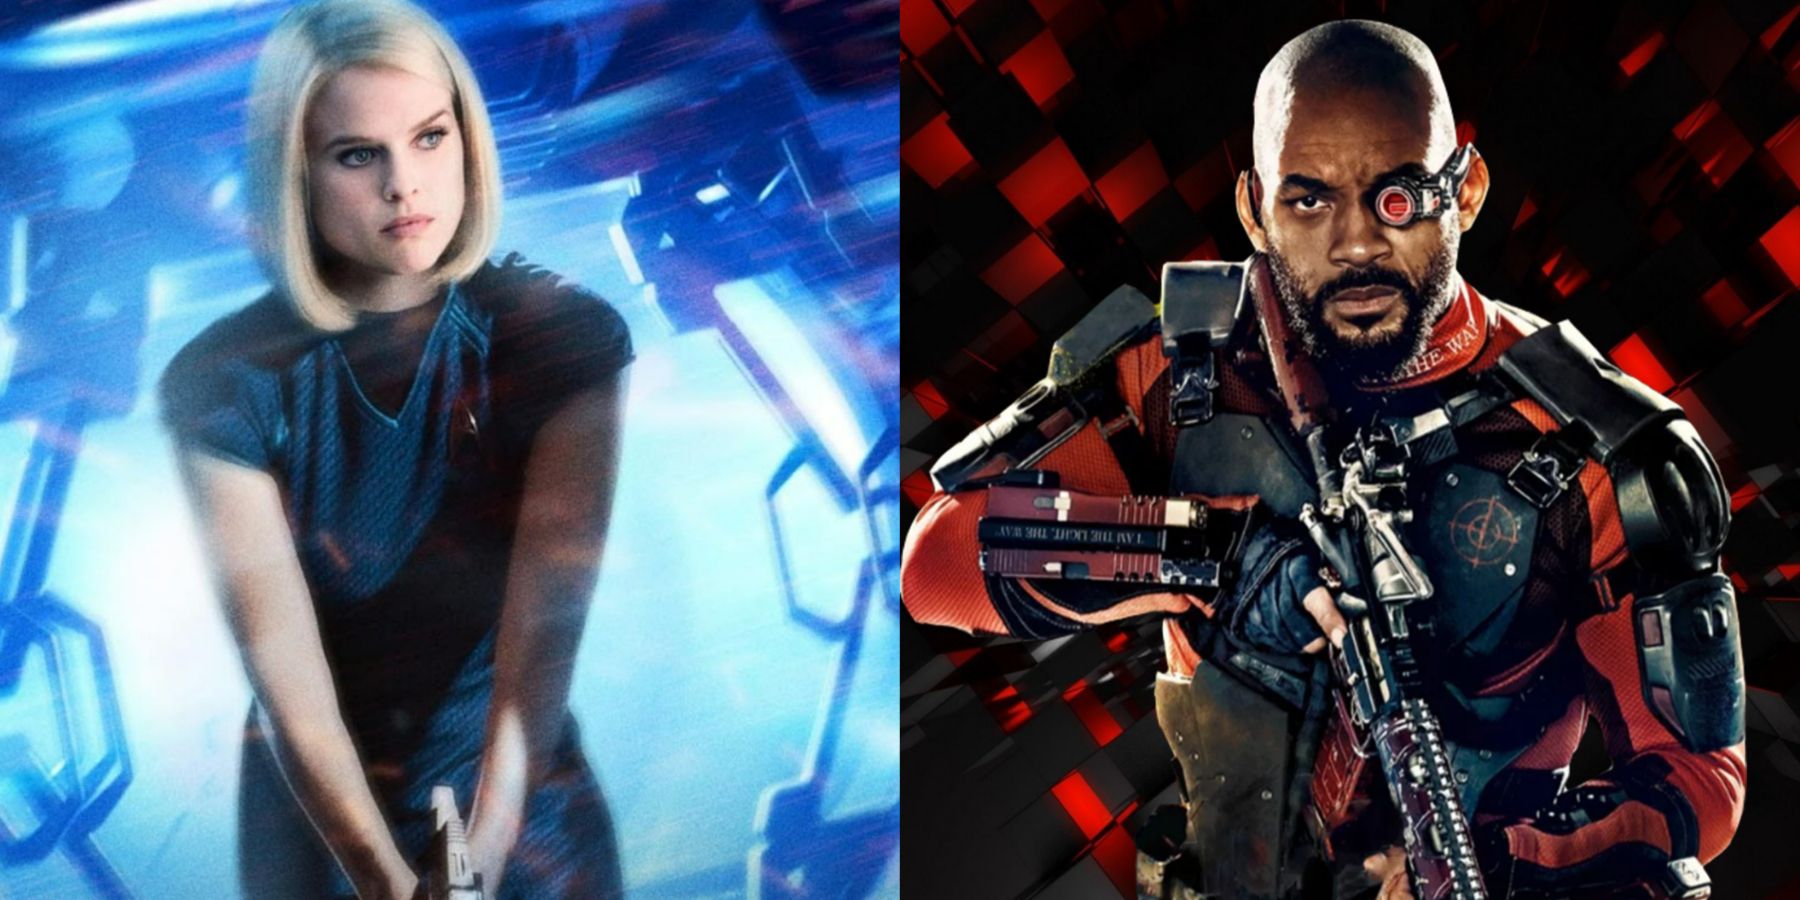 Alice Eve as Carol Marcus and Will Smith as Deadshot